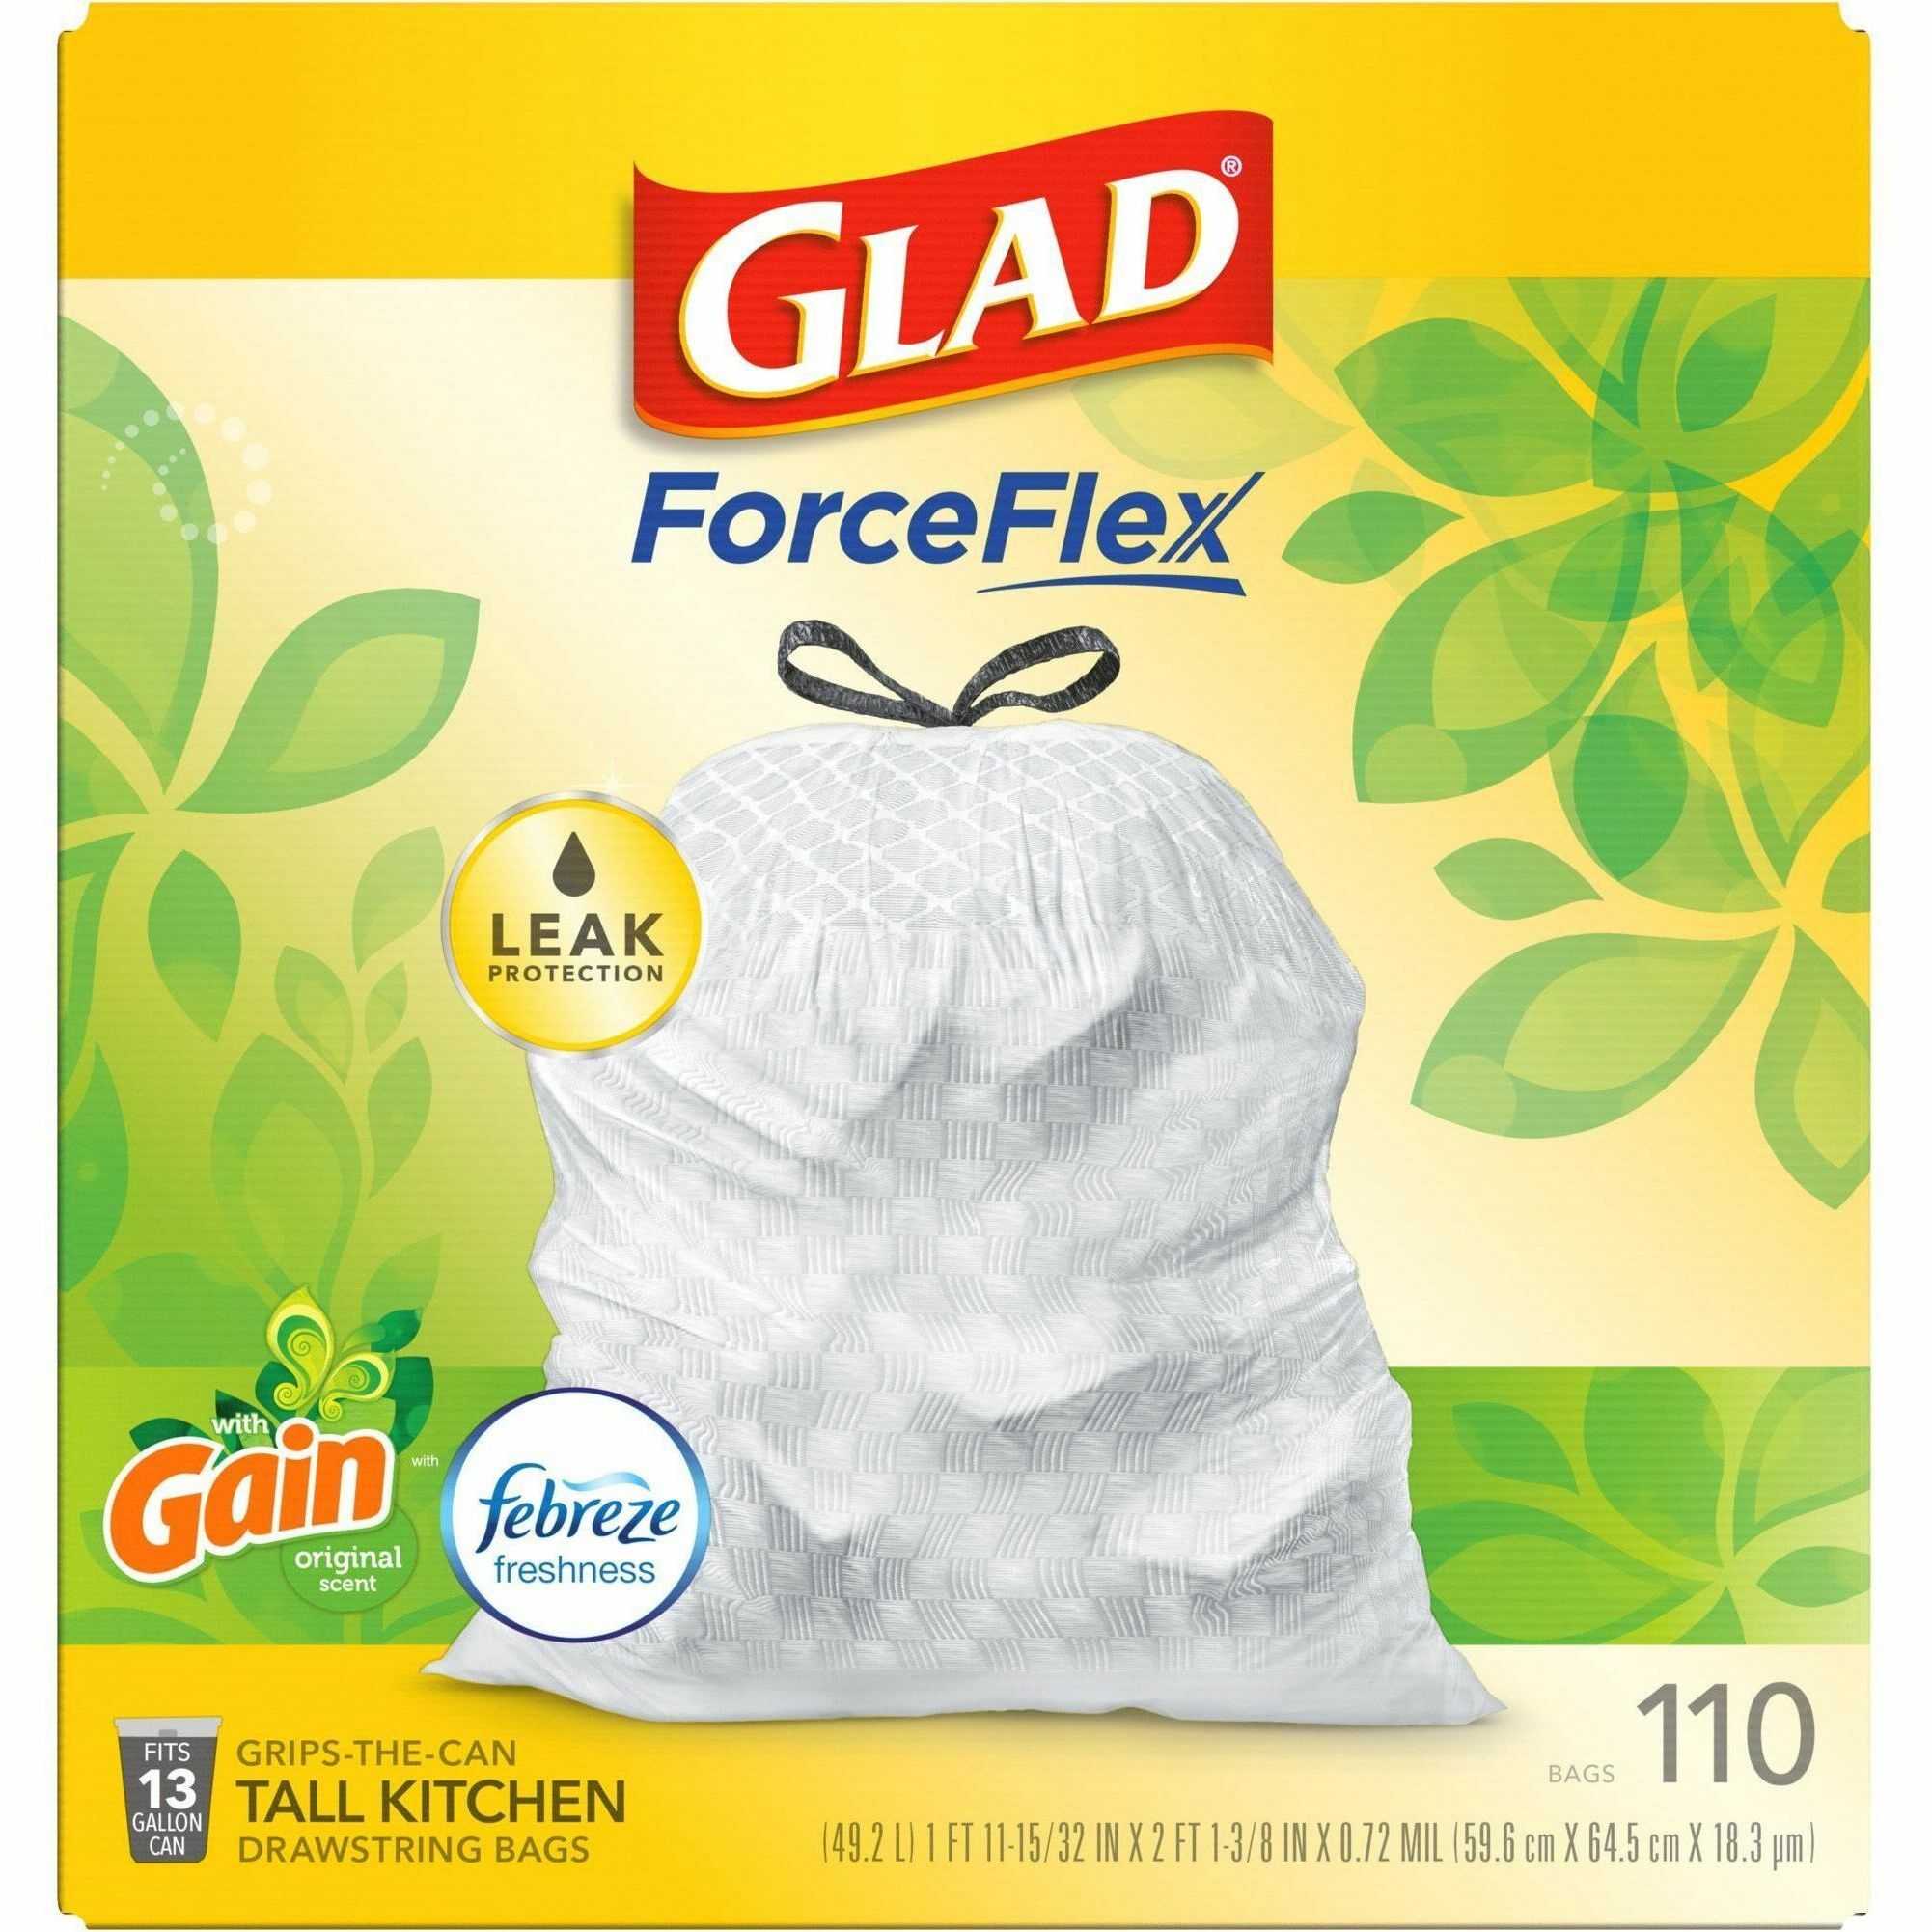 Glad ForceFlex Tall Kitchen Drawstring Trash Bags - Gain Original with Febreze Freshness - 13 gal Capacity - 25.38 ft Width x 33.75 ft Length - 0.72 mil (18 Micron) Thickness - Drawstring Closure - White - 110/Box - Home, Office, Kitchen, Breakroom - 3